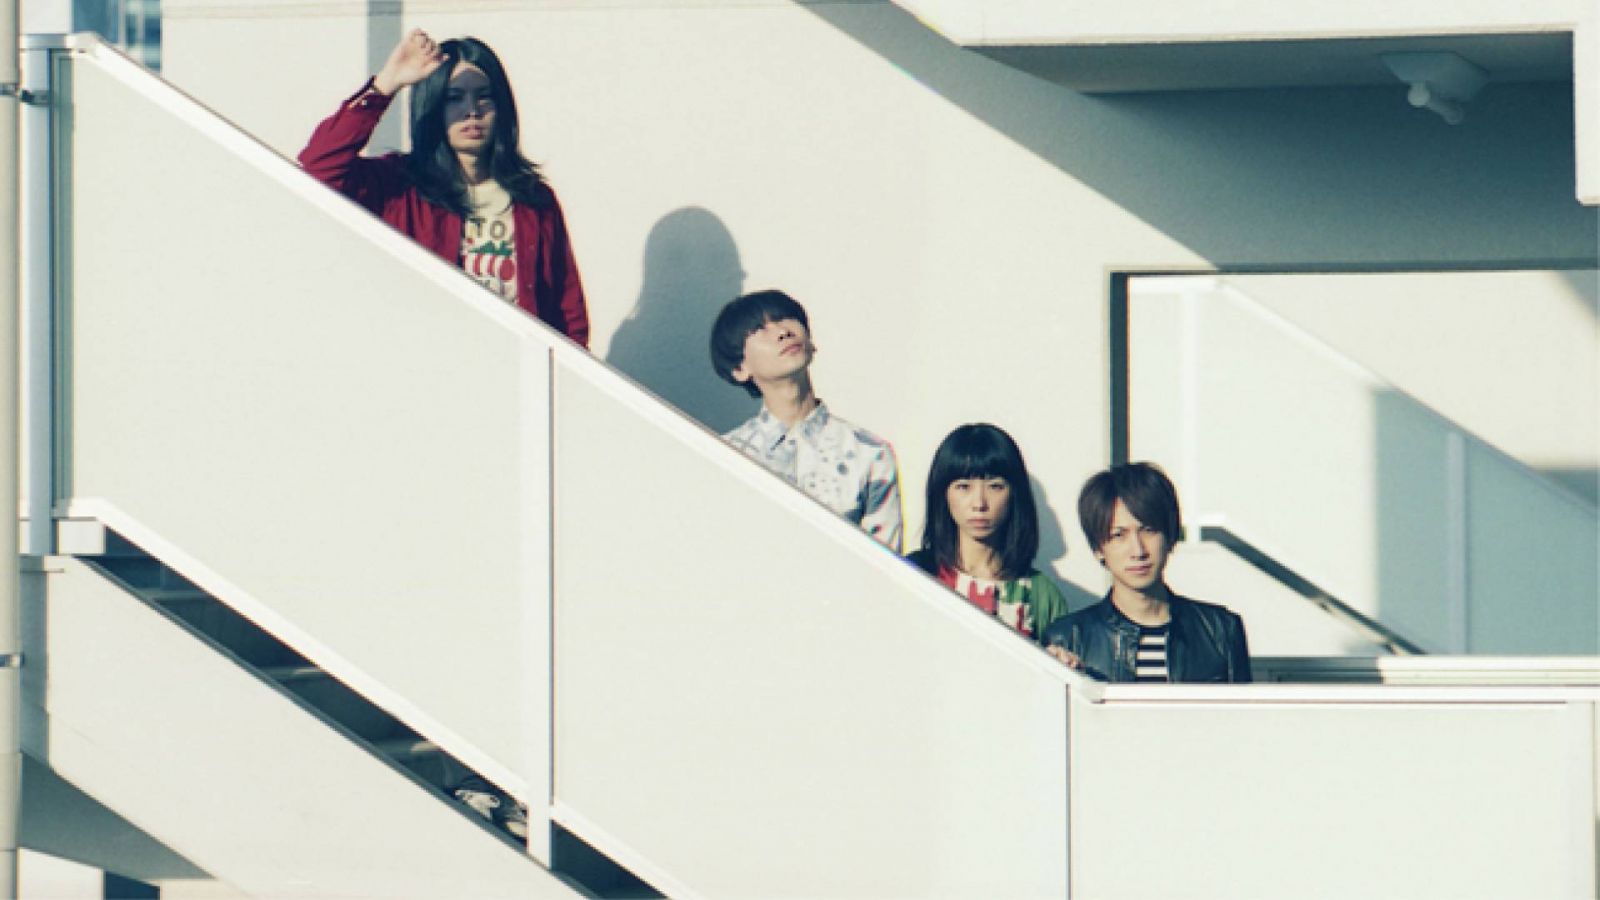 BAND A to Disband © Takuya Nagamine, BAND A. All Rights Reserved